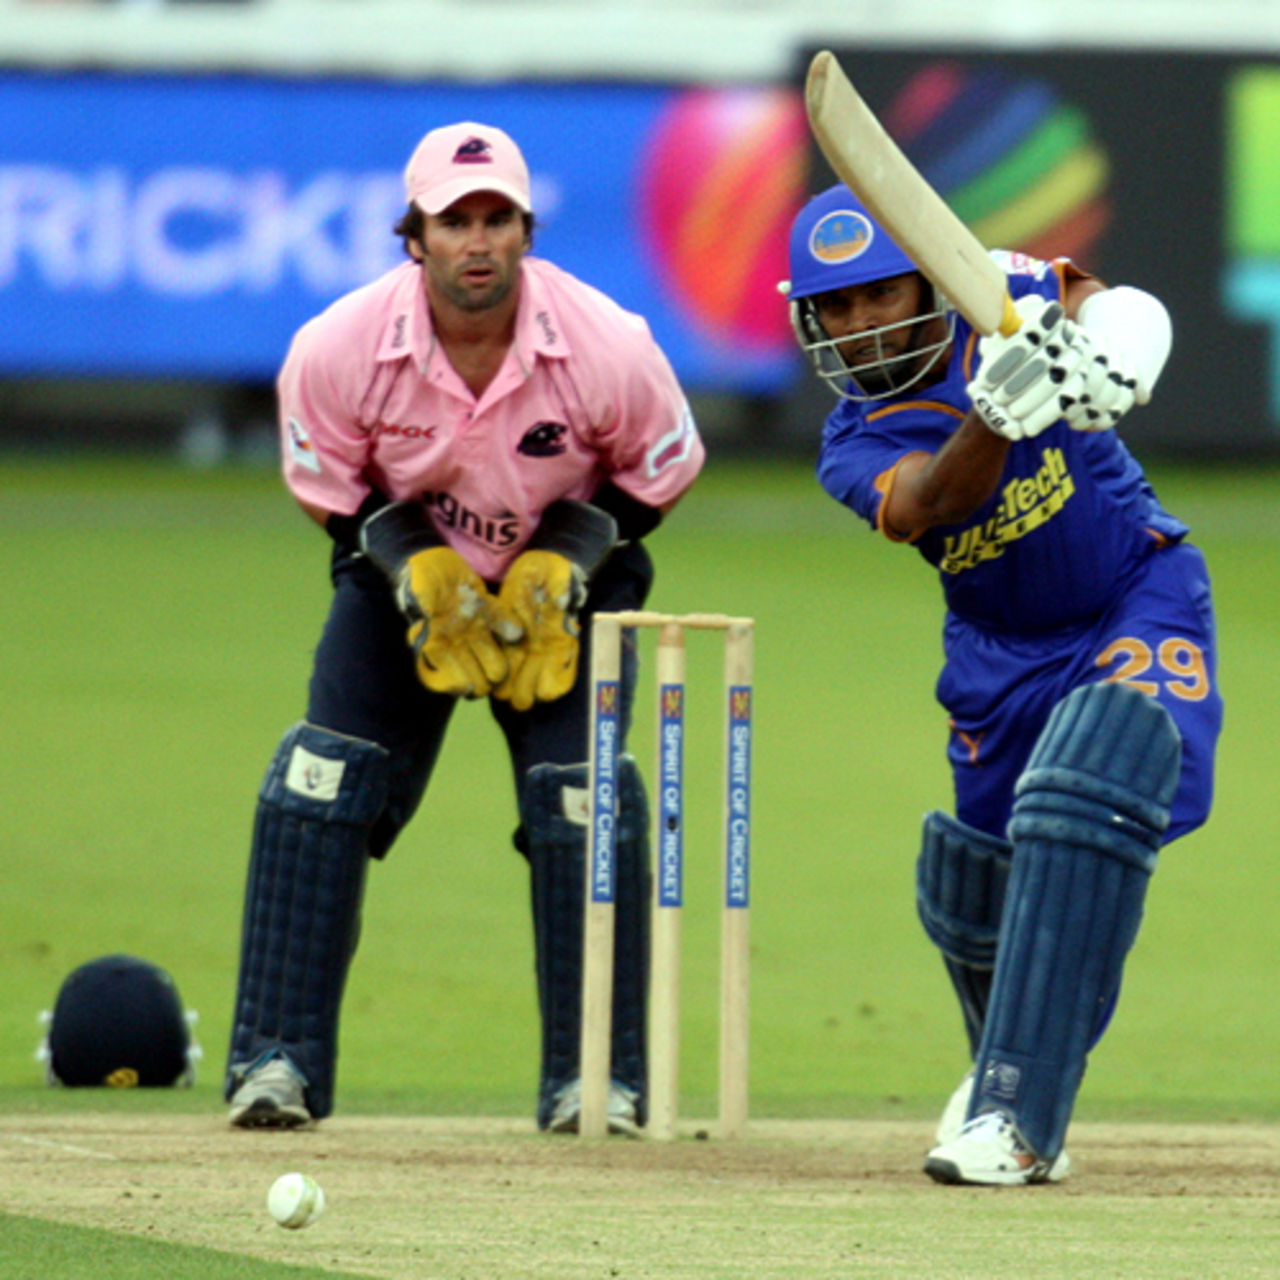 Swapnil Asnodkar smashes it through the off side, Middlesex v Rajasthan Royals, British Asian Cup, Lord's, July 6, 2009